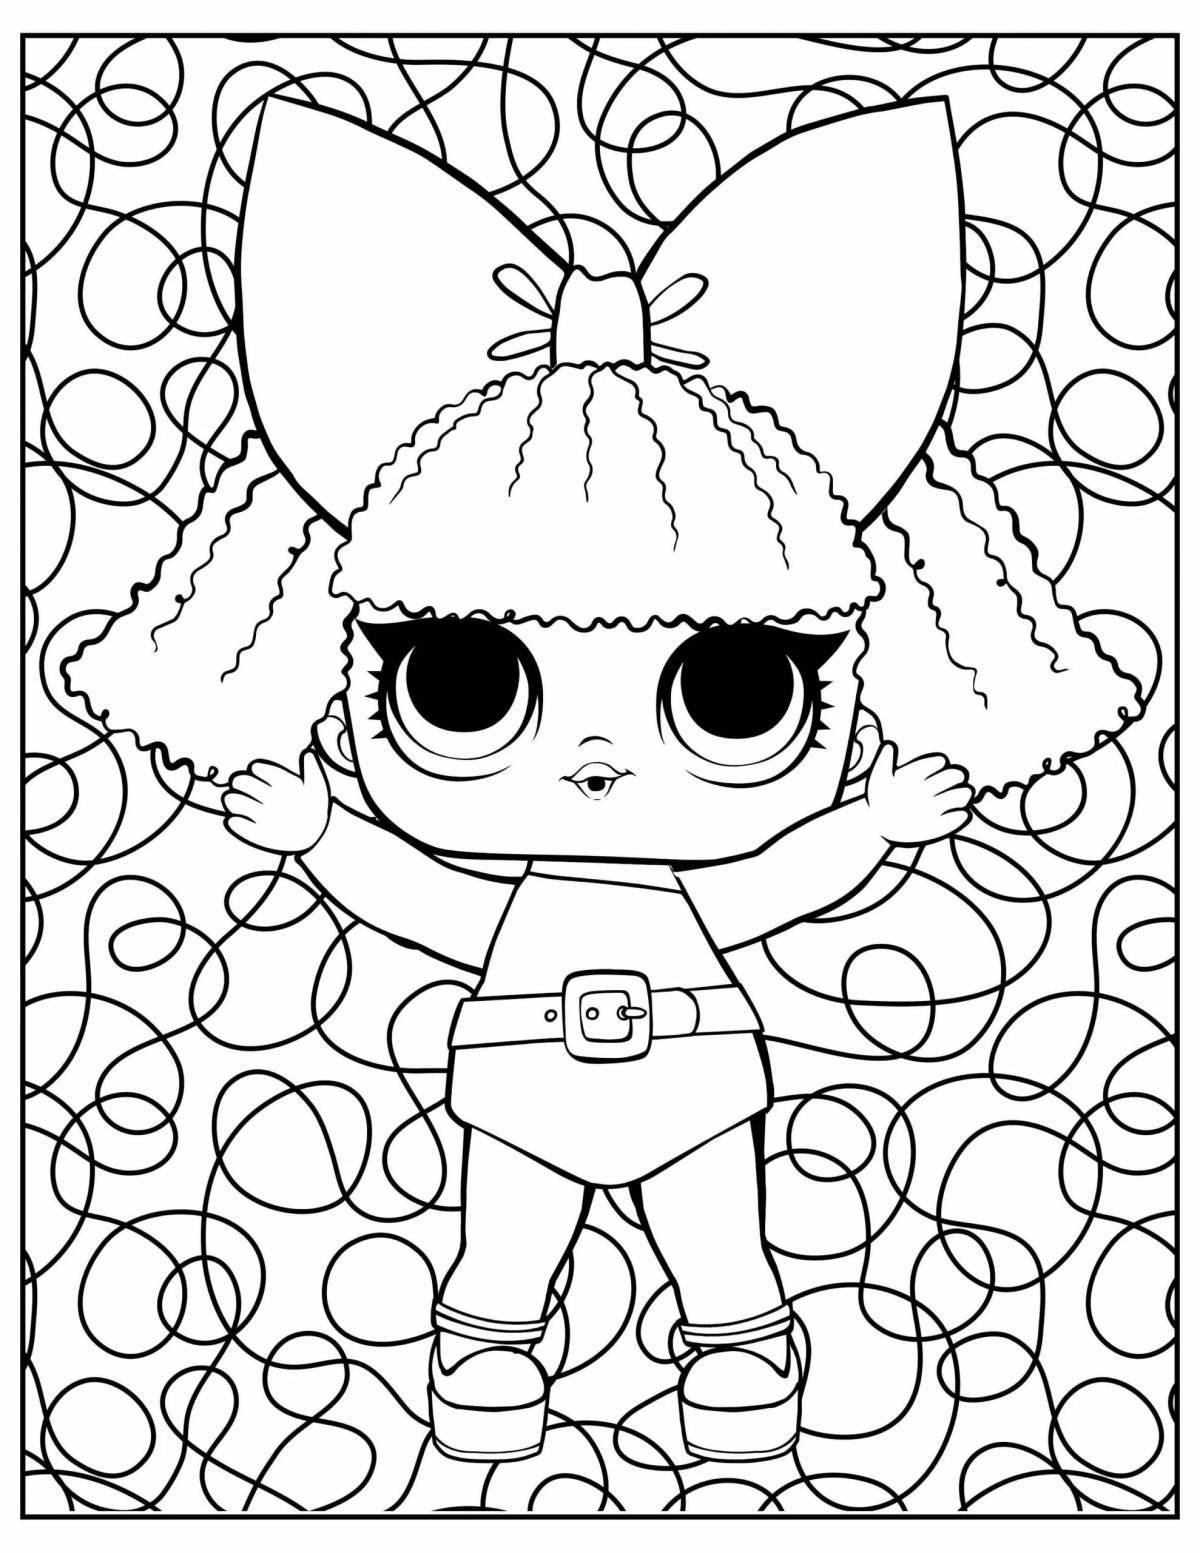 Adventure coloring lol doll game